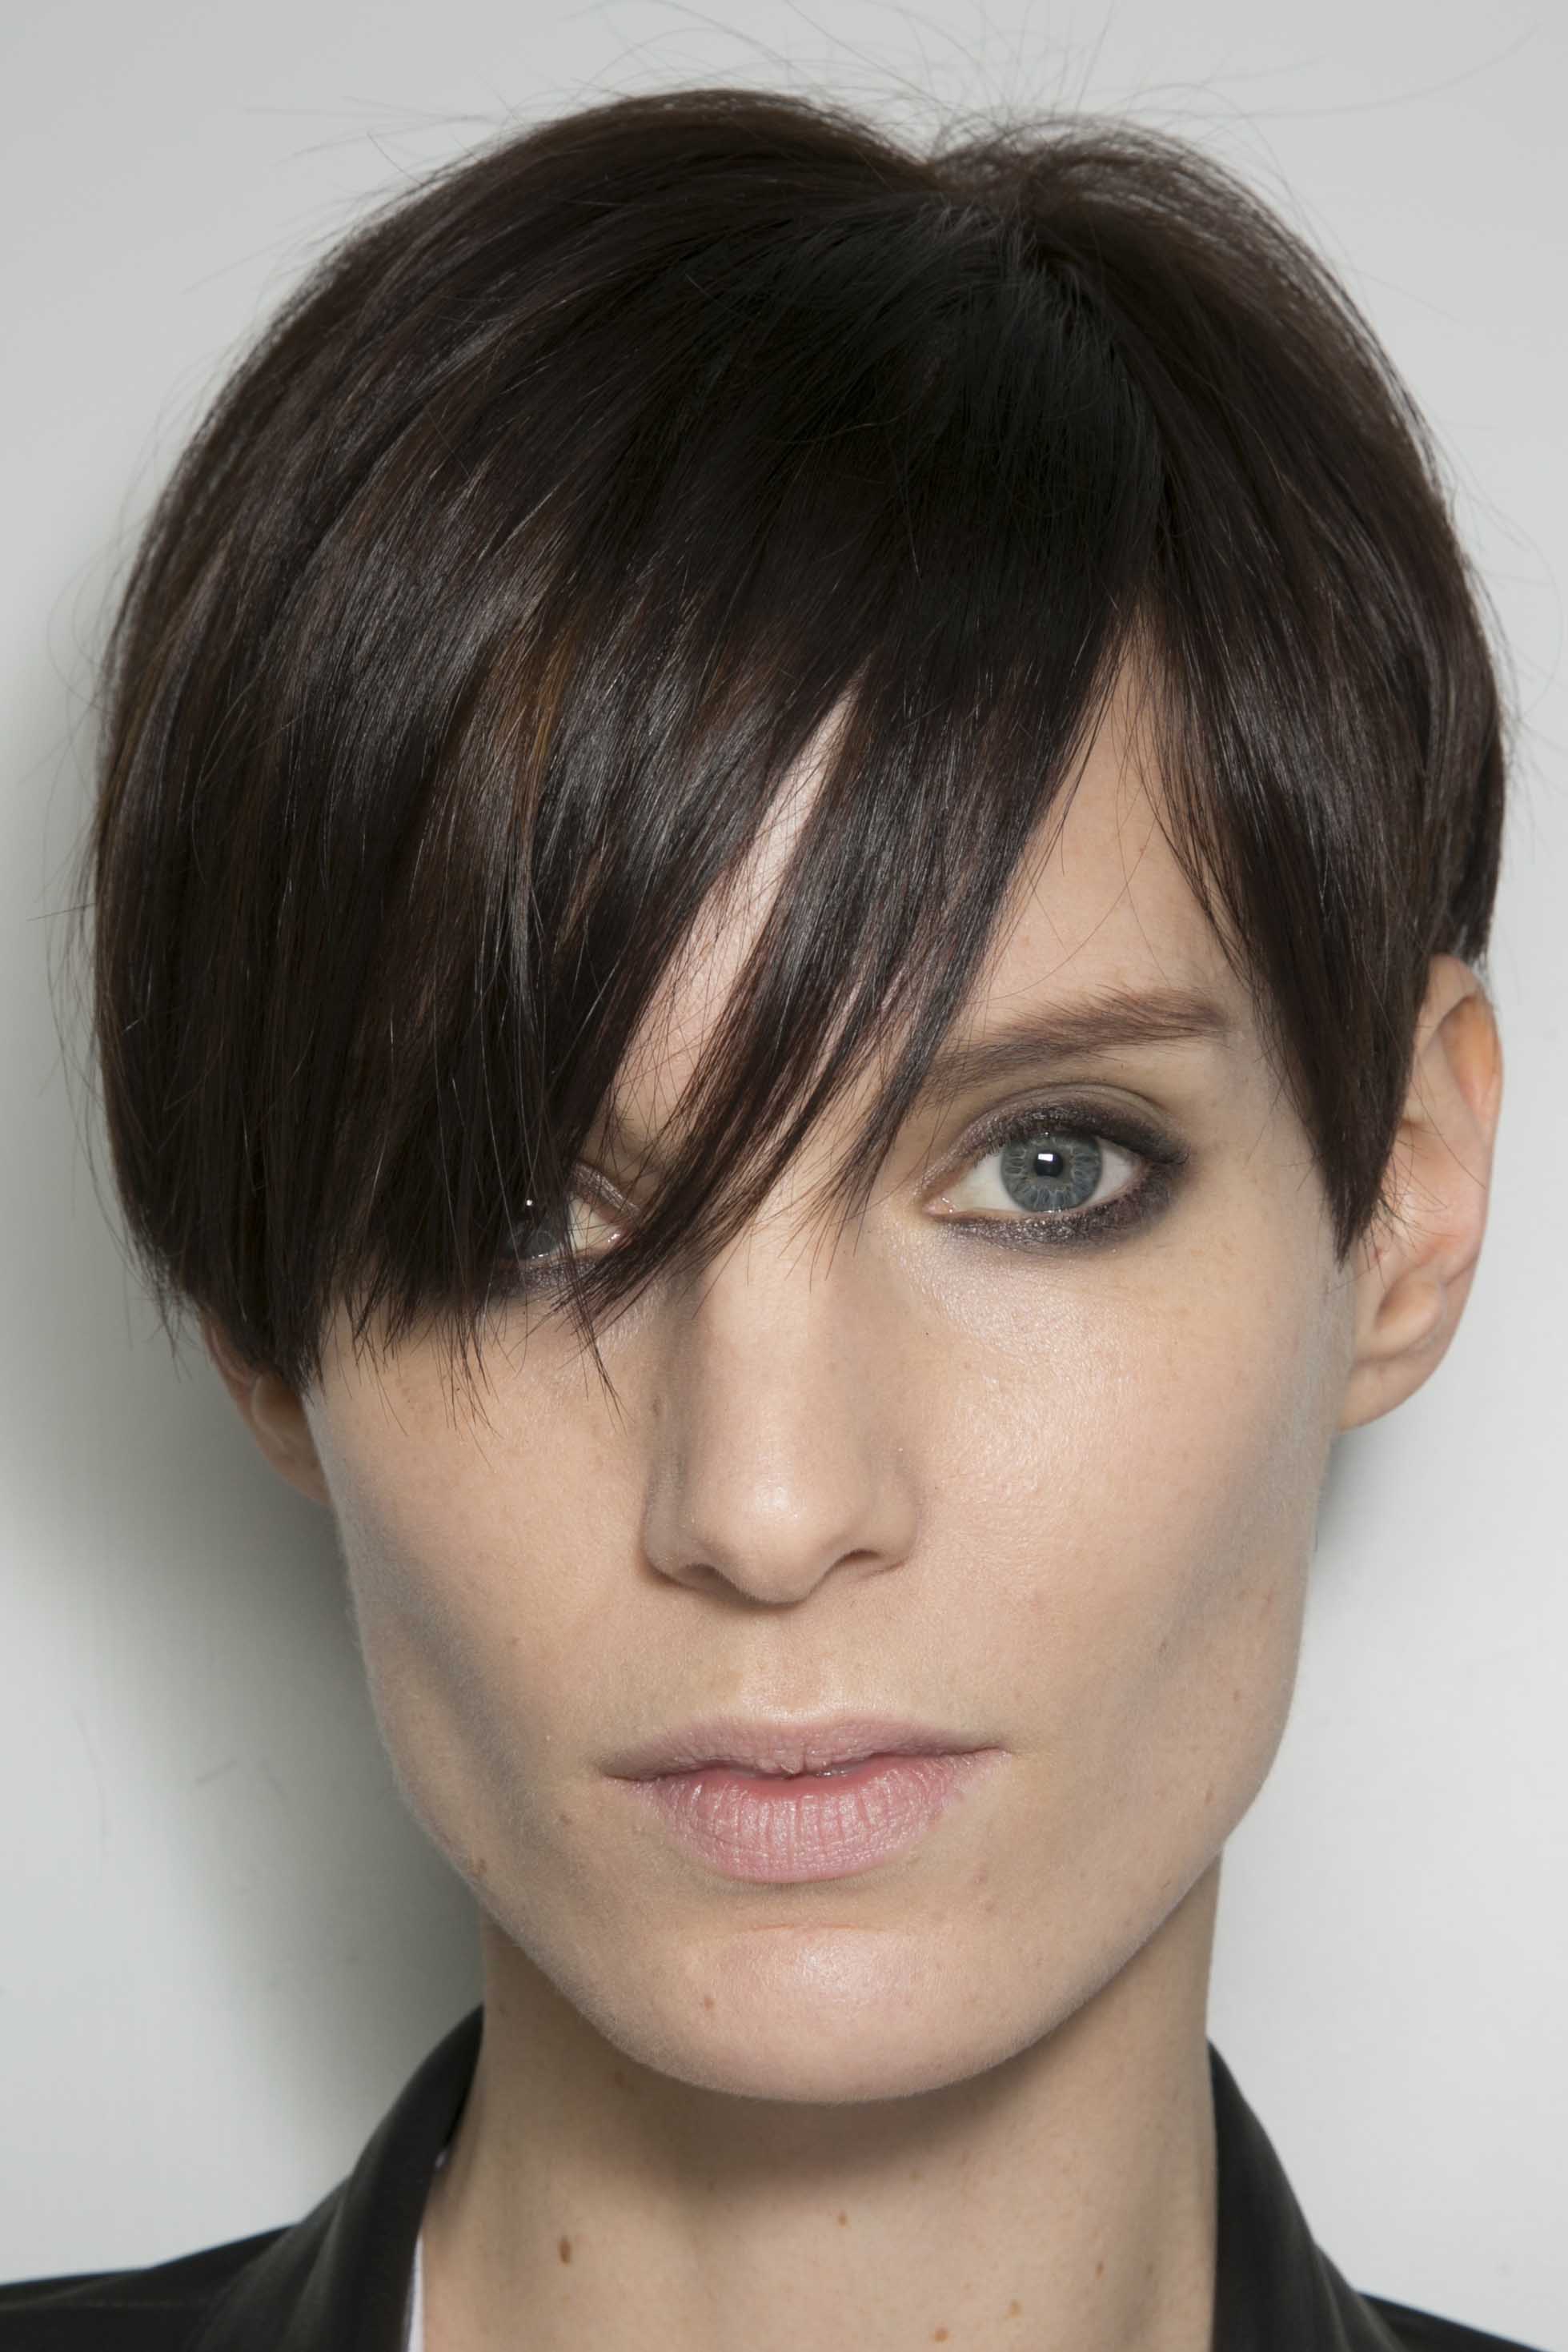 Hairstyles For Your Square Face Shape: Short, Medium And Long